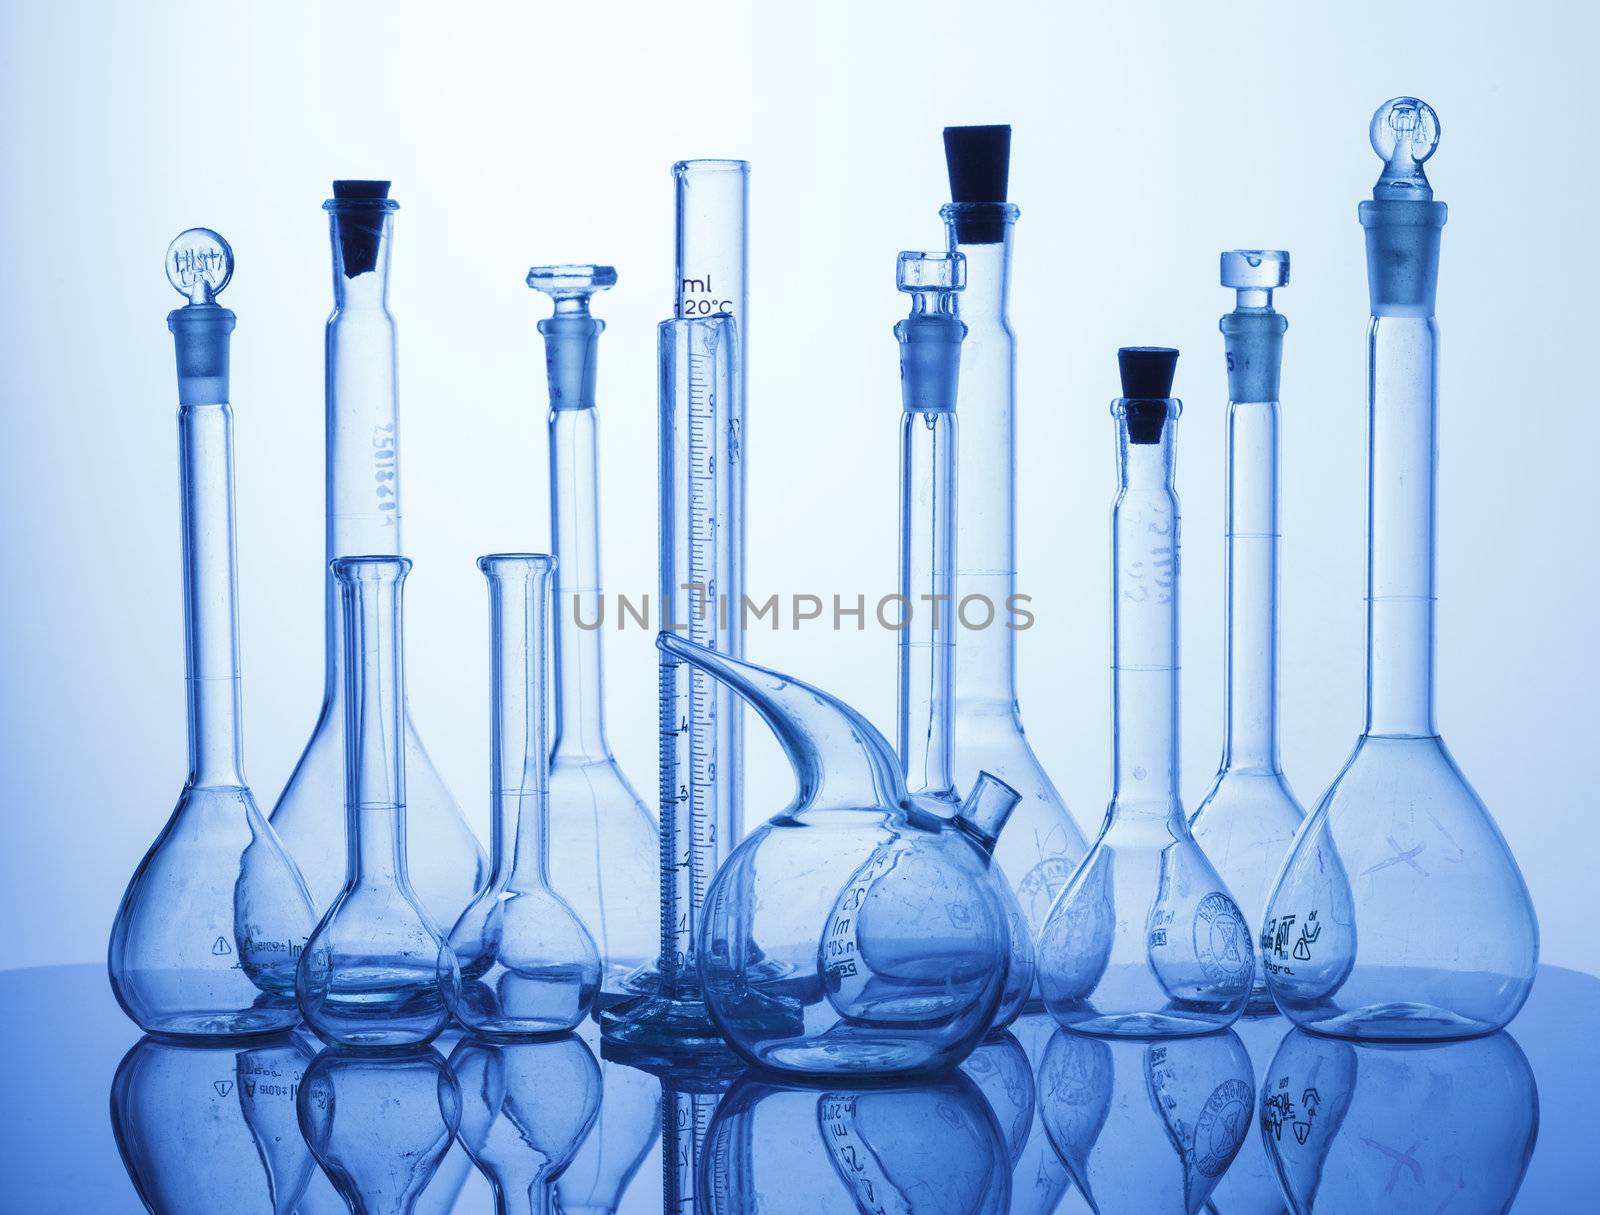 Research Lab assorted Glassware Equipment on blue background